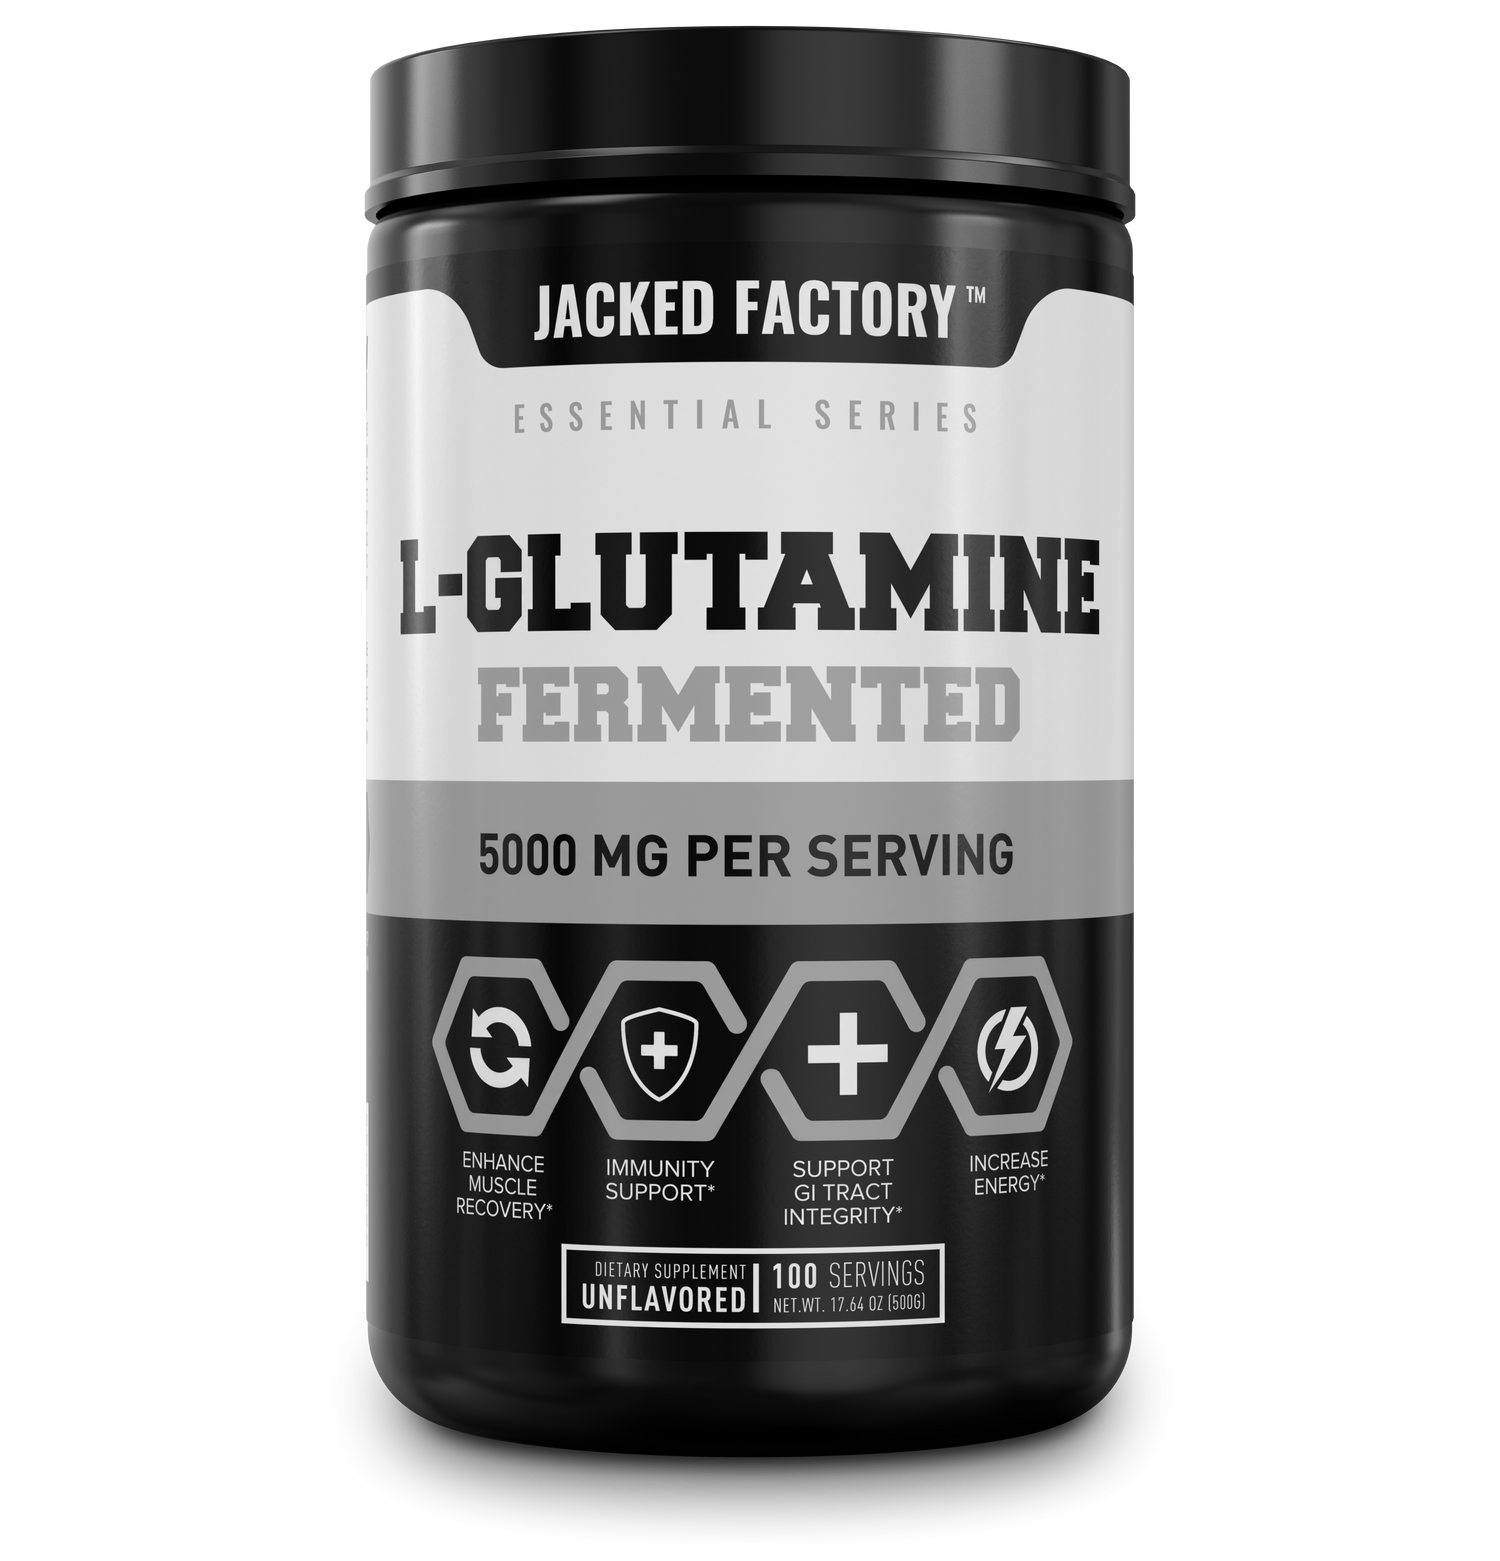 Jacked Factory's L-Glutamine Fermented (100 servings) in a black bottle with white and grey label